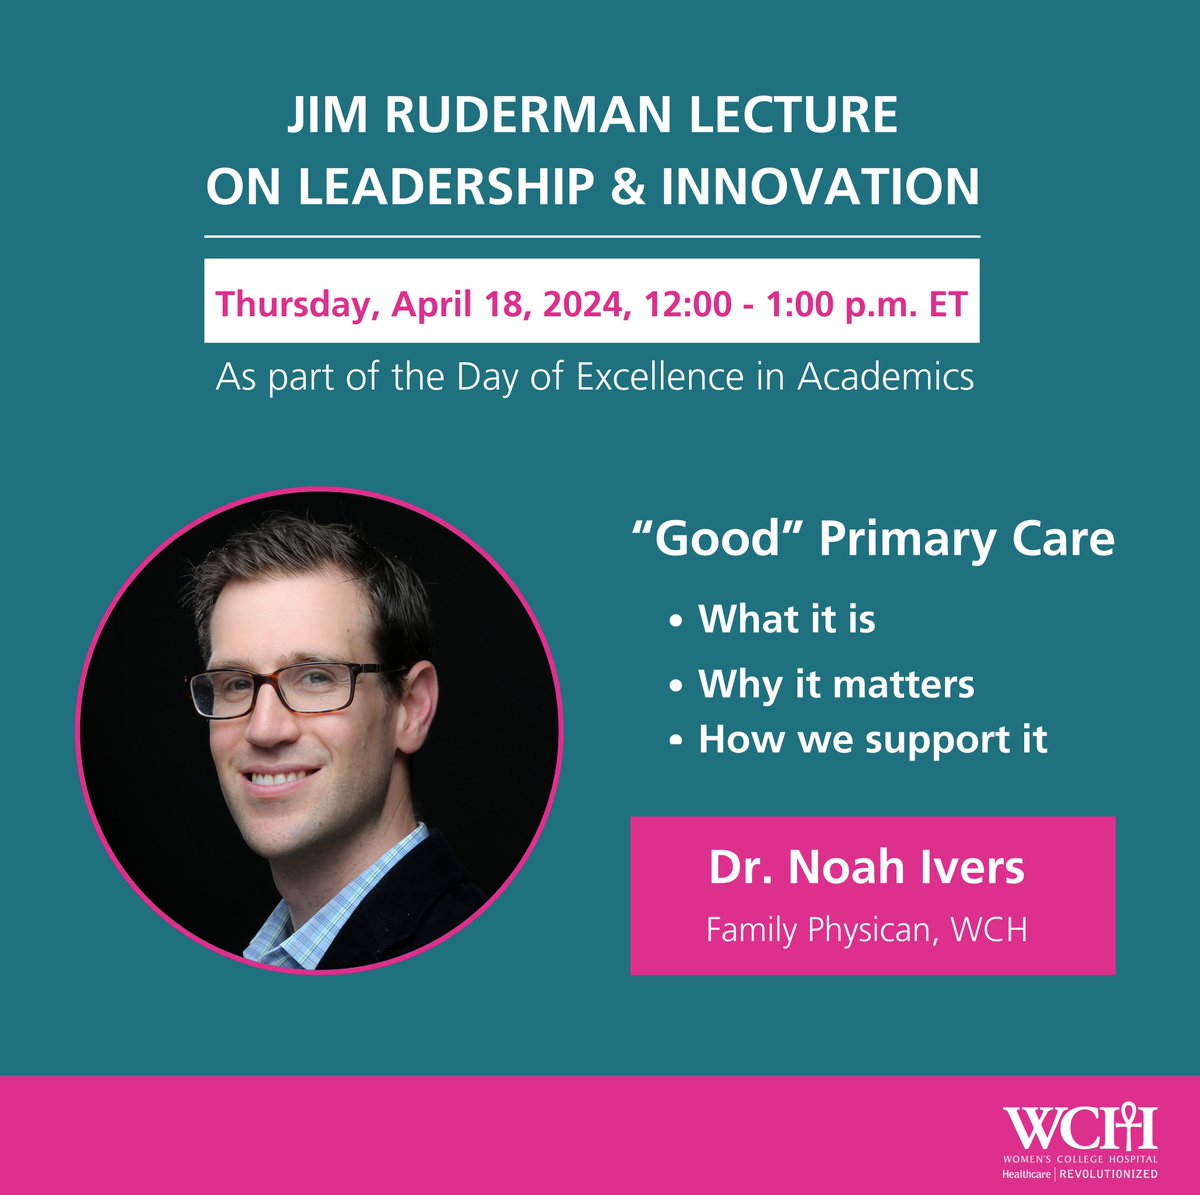 WCH holds its annual Day of Excellence in Academics this week, and you're invited! WCH family physician Dr. Noah Ivers will deliver this year's Ruderman Lecture on “Good” Primary Care: What It Is, Why It Matters, and How We Support It. Register here - loom.ly/MO9s7f4